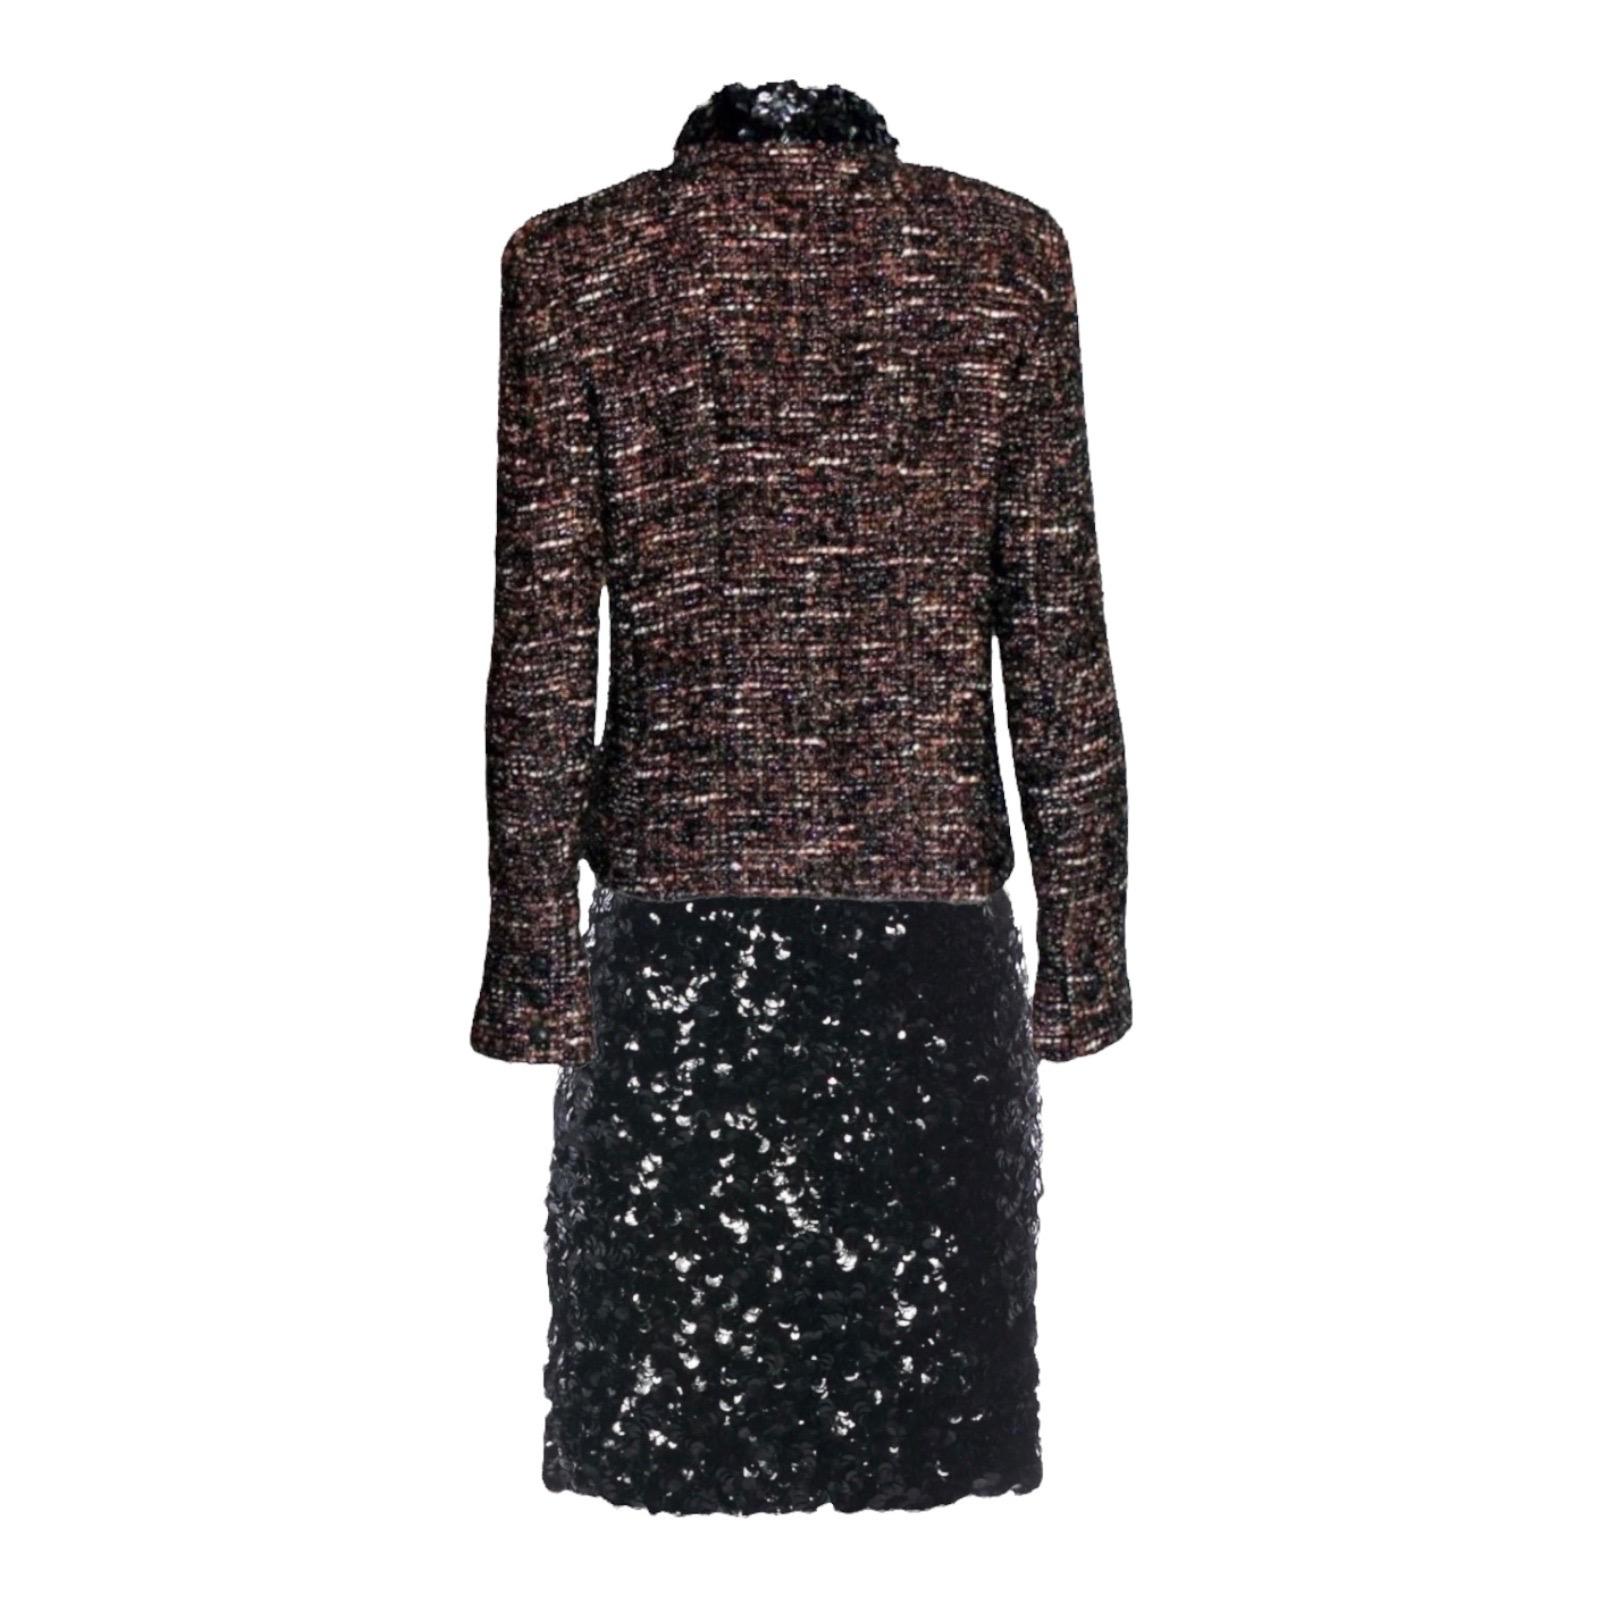 Beautiful CHANEL fantasy tweed jacket & skirt suit
A true CHANEL signature ensemble that will last you for many years
Jacket closes in front with concealed hooks
Slim, fitted style
Amazing metallic tweed fabric
Beautiful buttons on sleeves with real